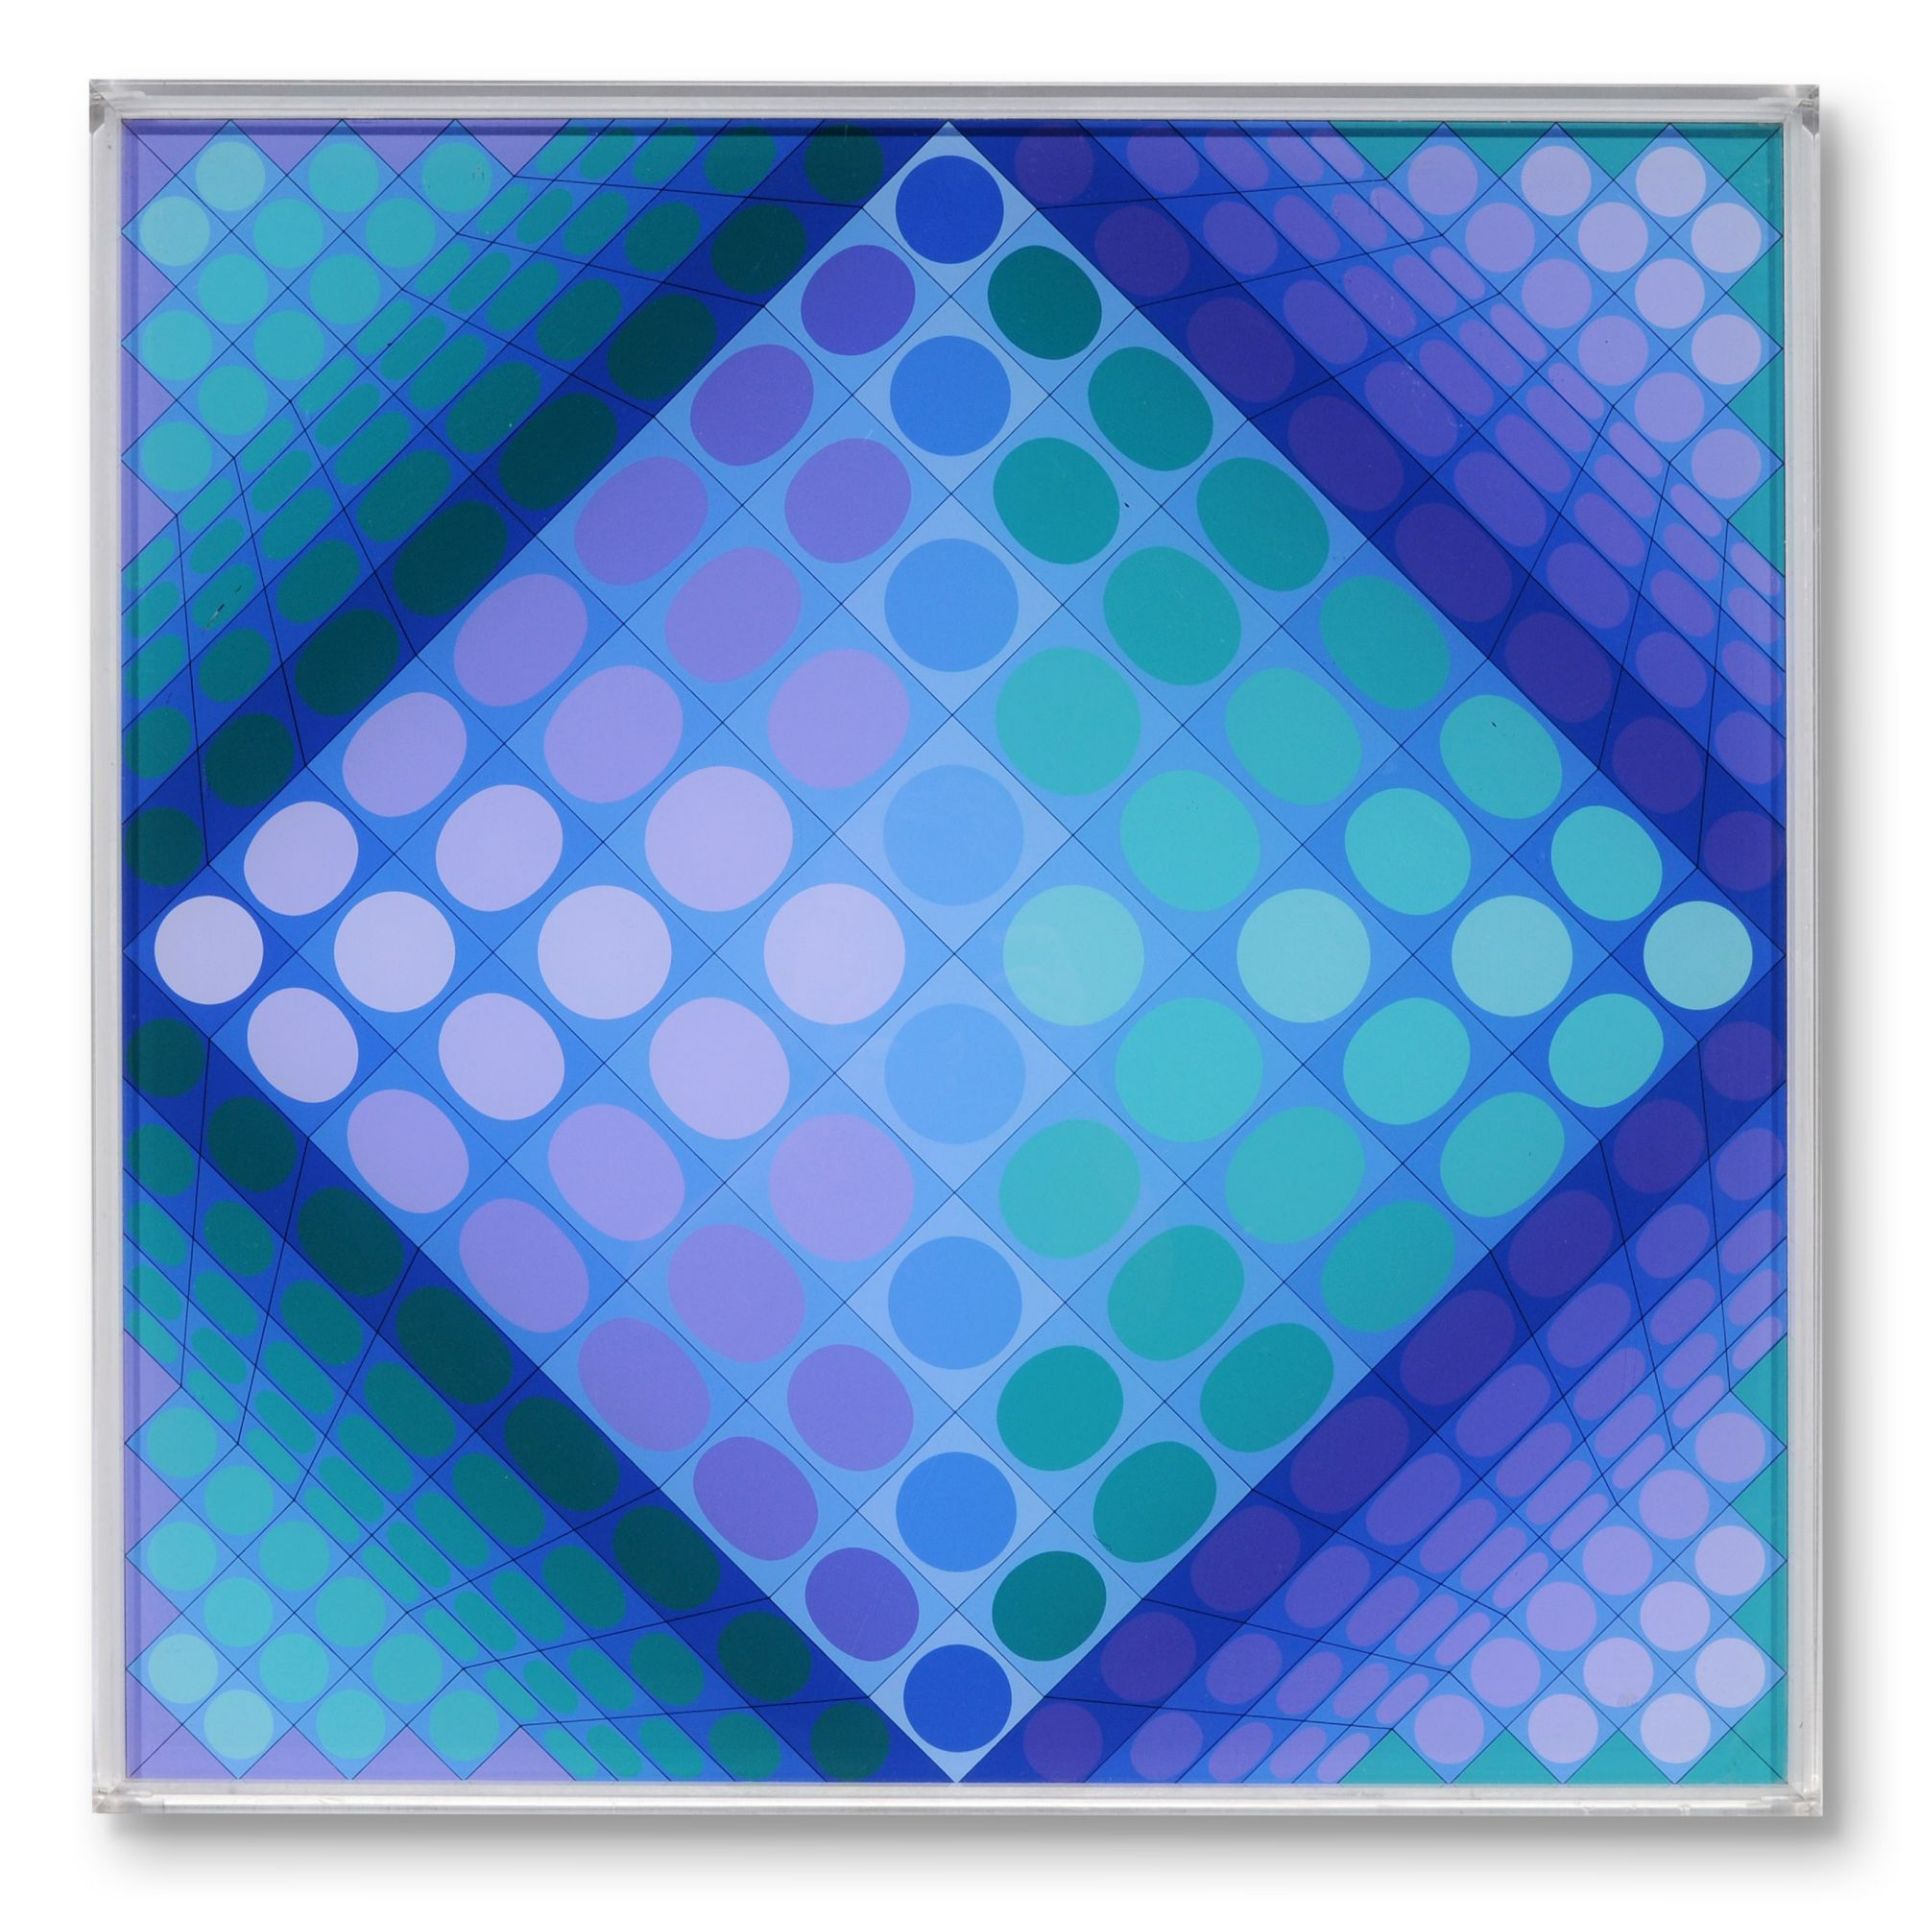 Victor Vasarely "Vasarely Schach". 1981. - Image 2 of 4